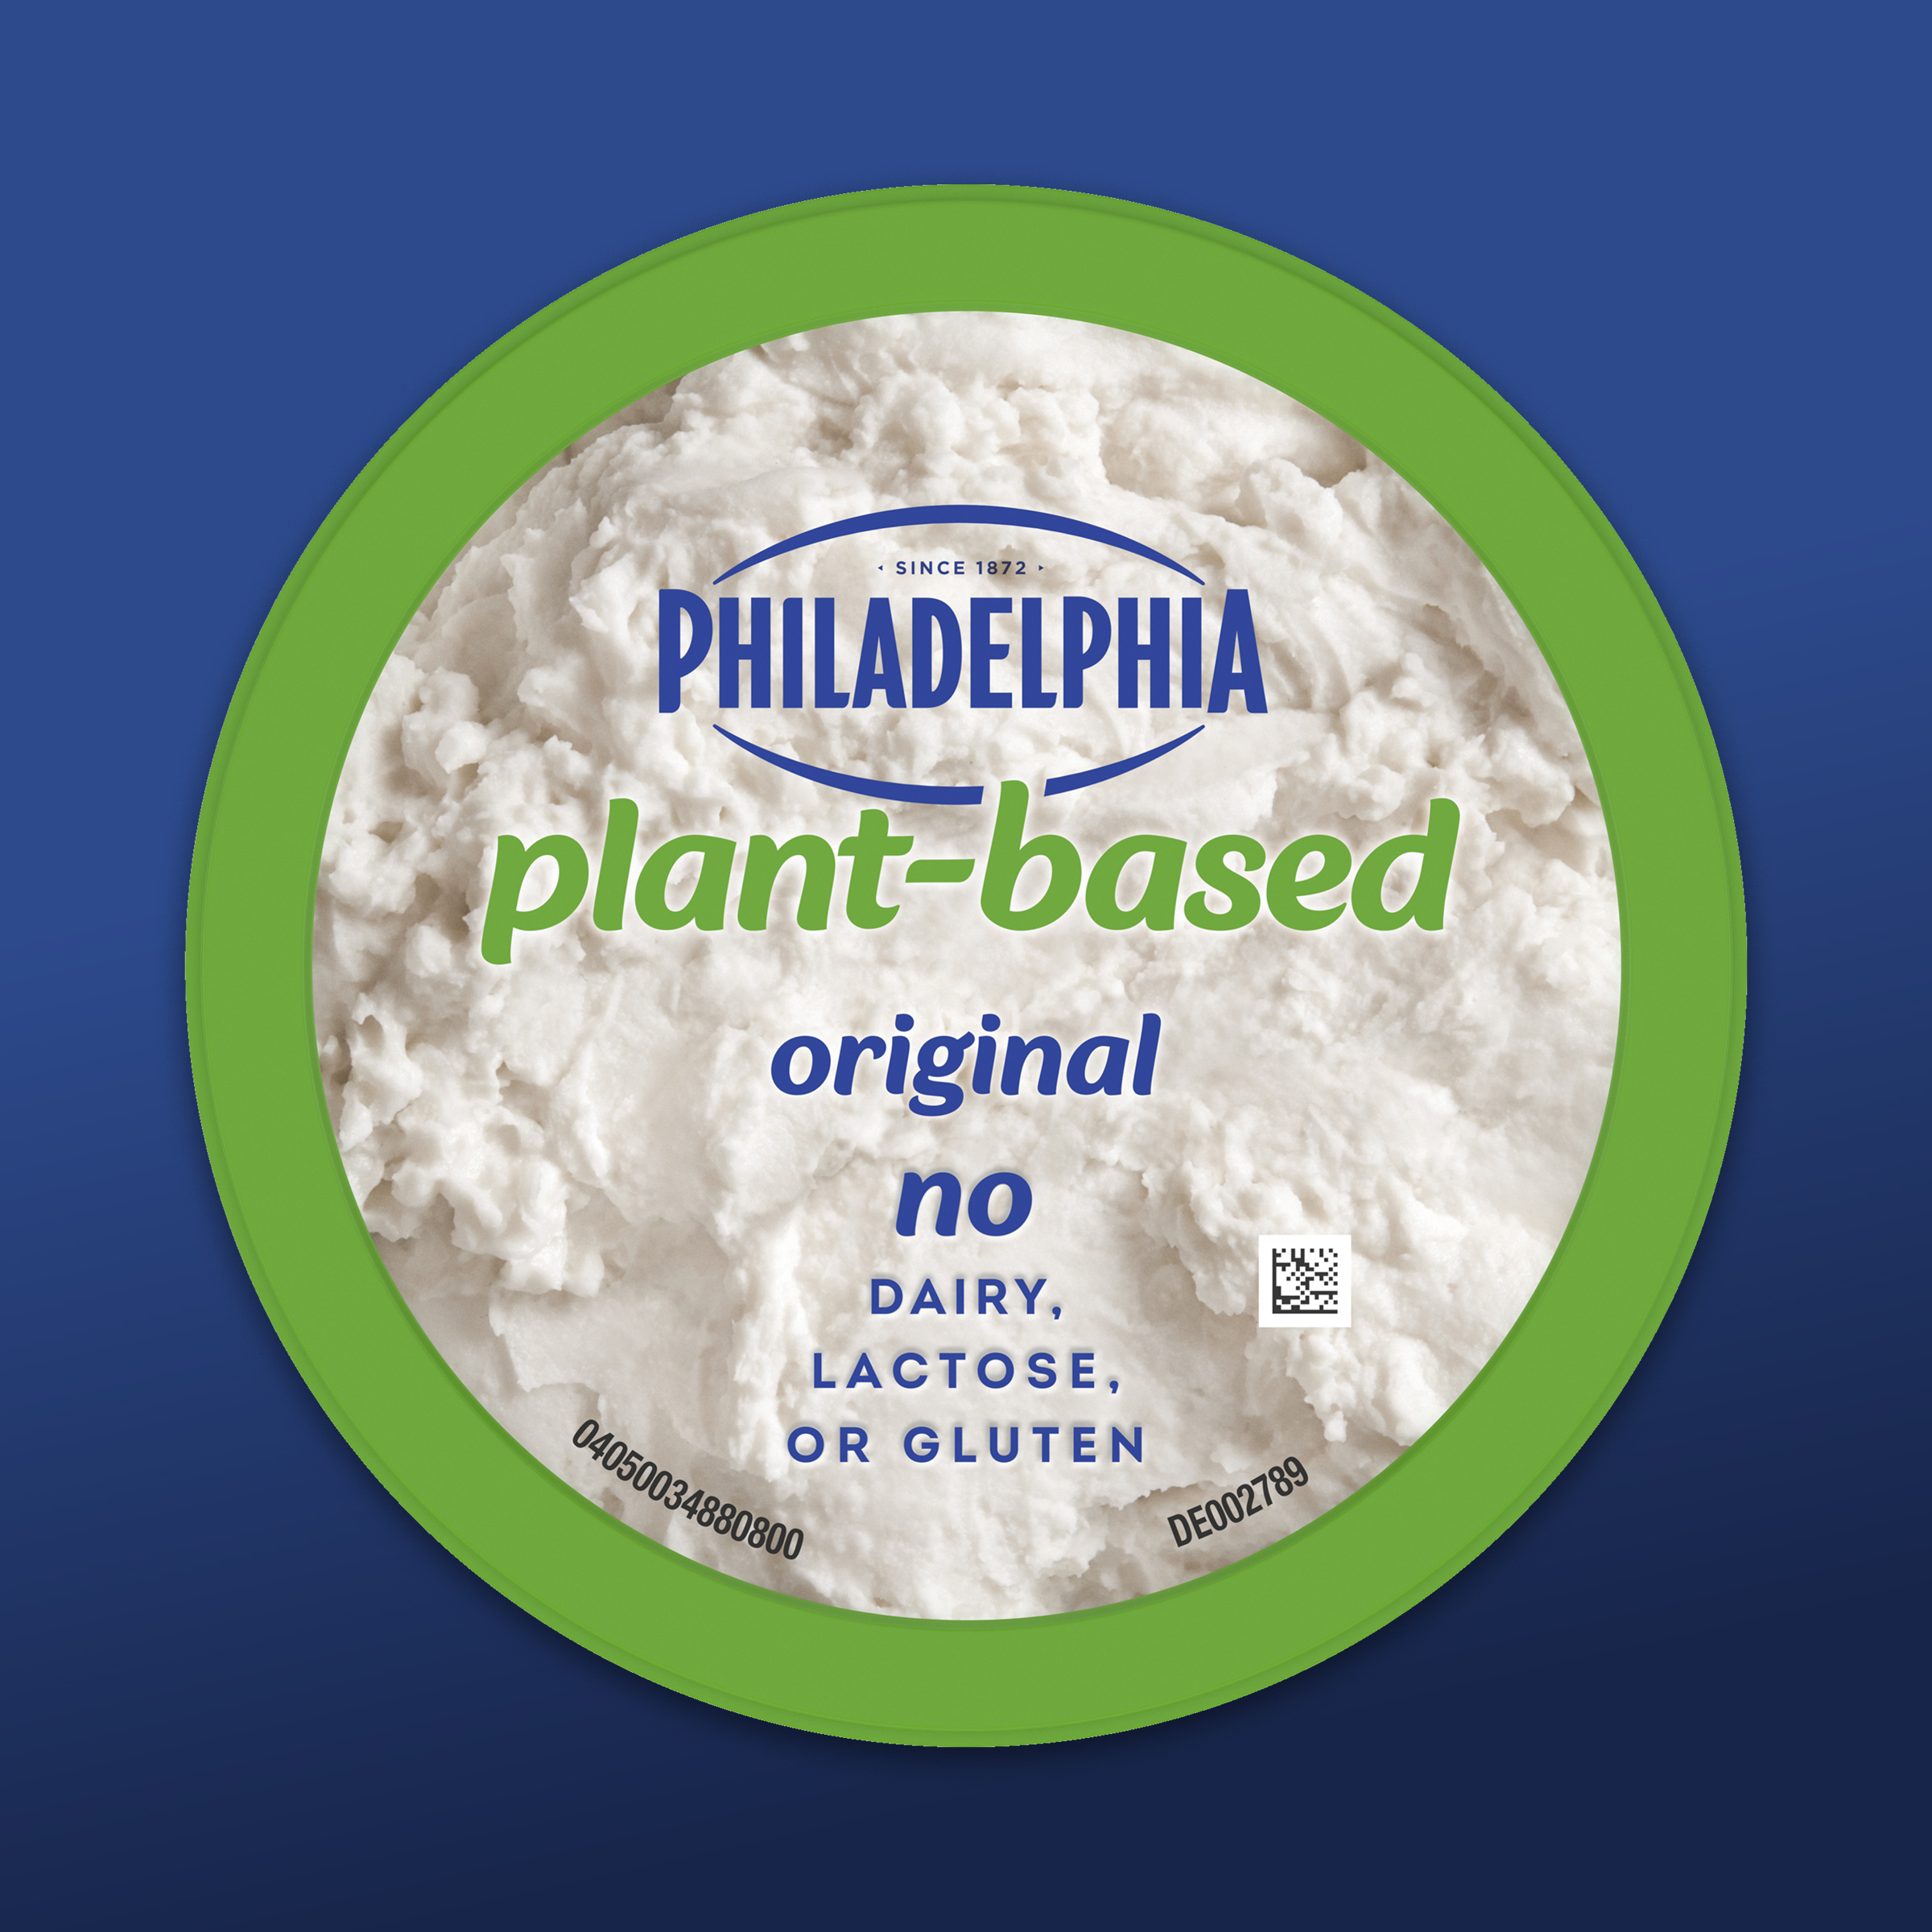 After 150 Years, Philadelphia Gets Into the Vegan Cream Cheese Business |  VegNews